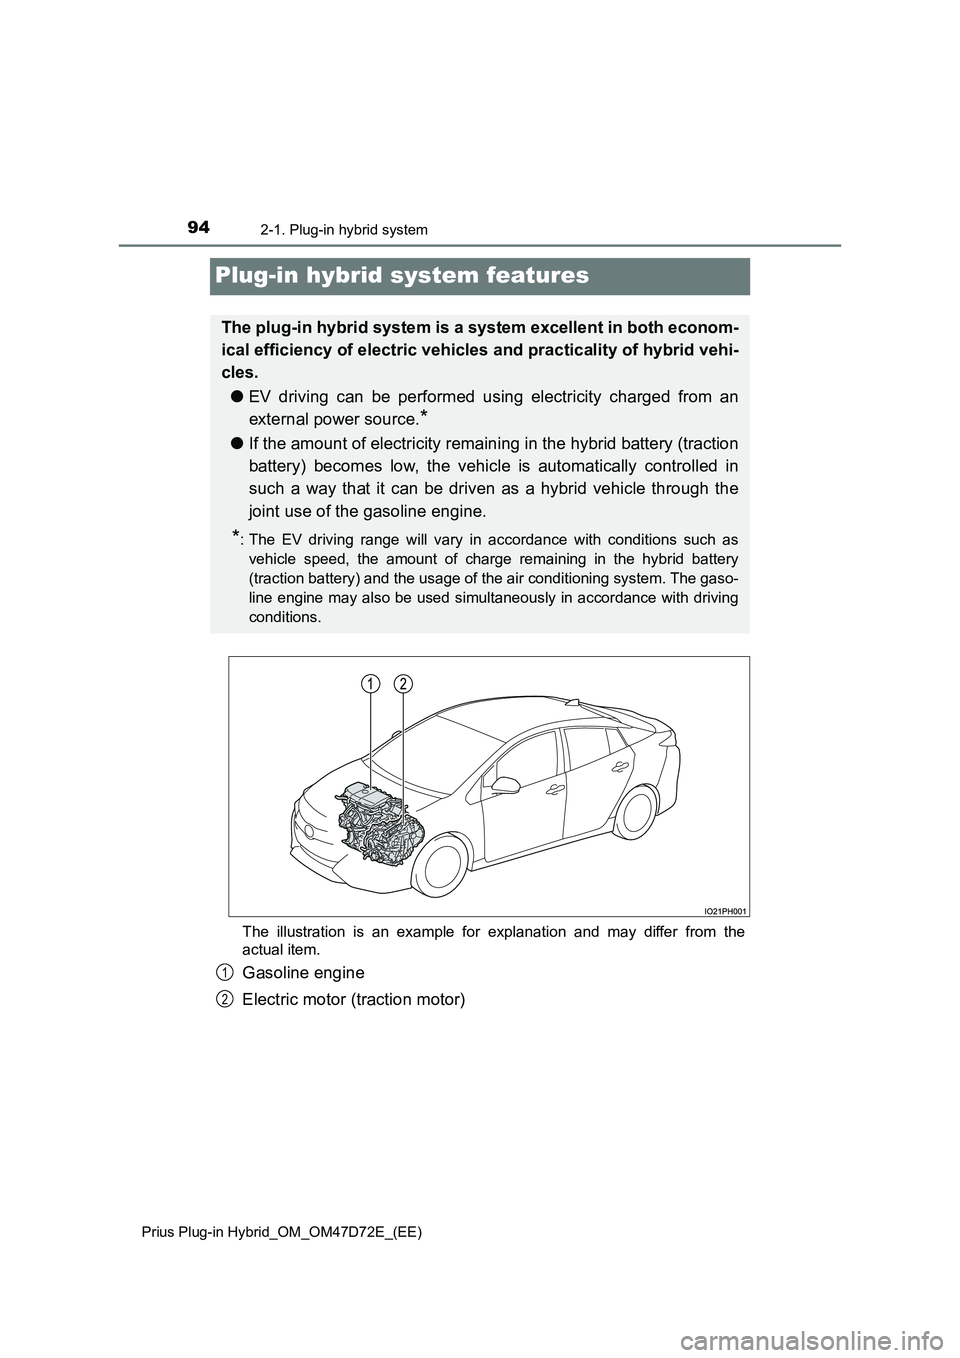 TOYOTA PRIUS PLUG-IN HYBRID 2021  Owners Manual 942-1. Plug-in hybrid system 
Prius Plug-in Hybrid_OM_OM47D72E_(EE)
Plug-in hybrid system features
The illustration is an example for explanation and may differ from the 
actual item.
Gasoline engine 